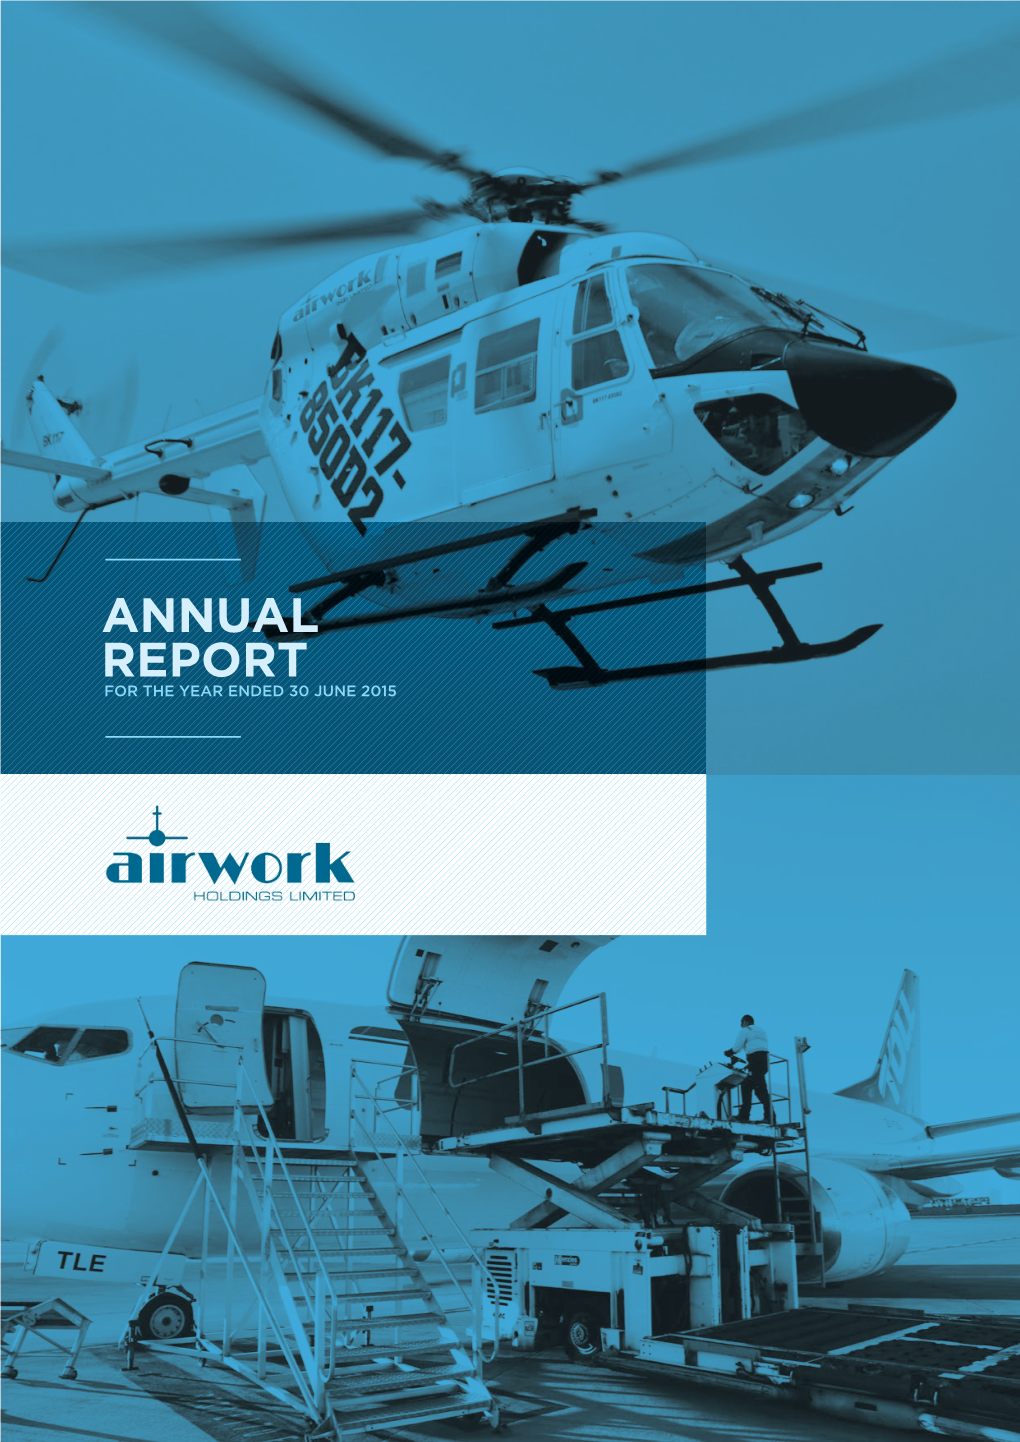 Annual Report for the Year Ended 30 June 2015 Airwork Holdings Limited Annual Report